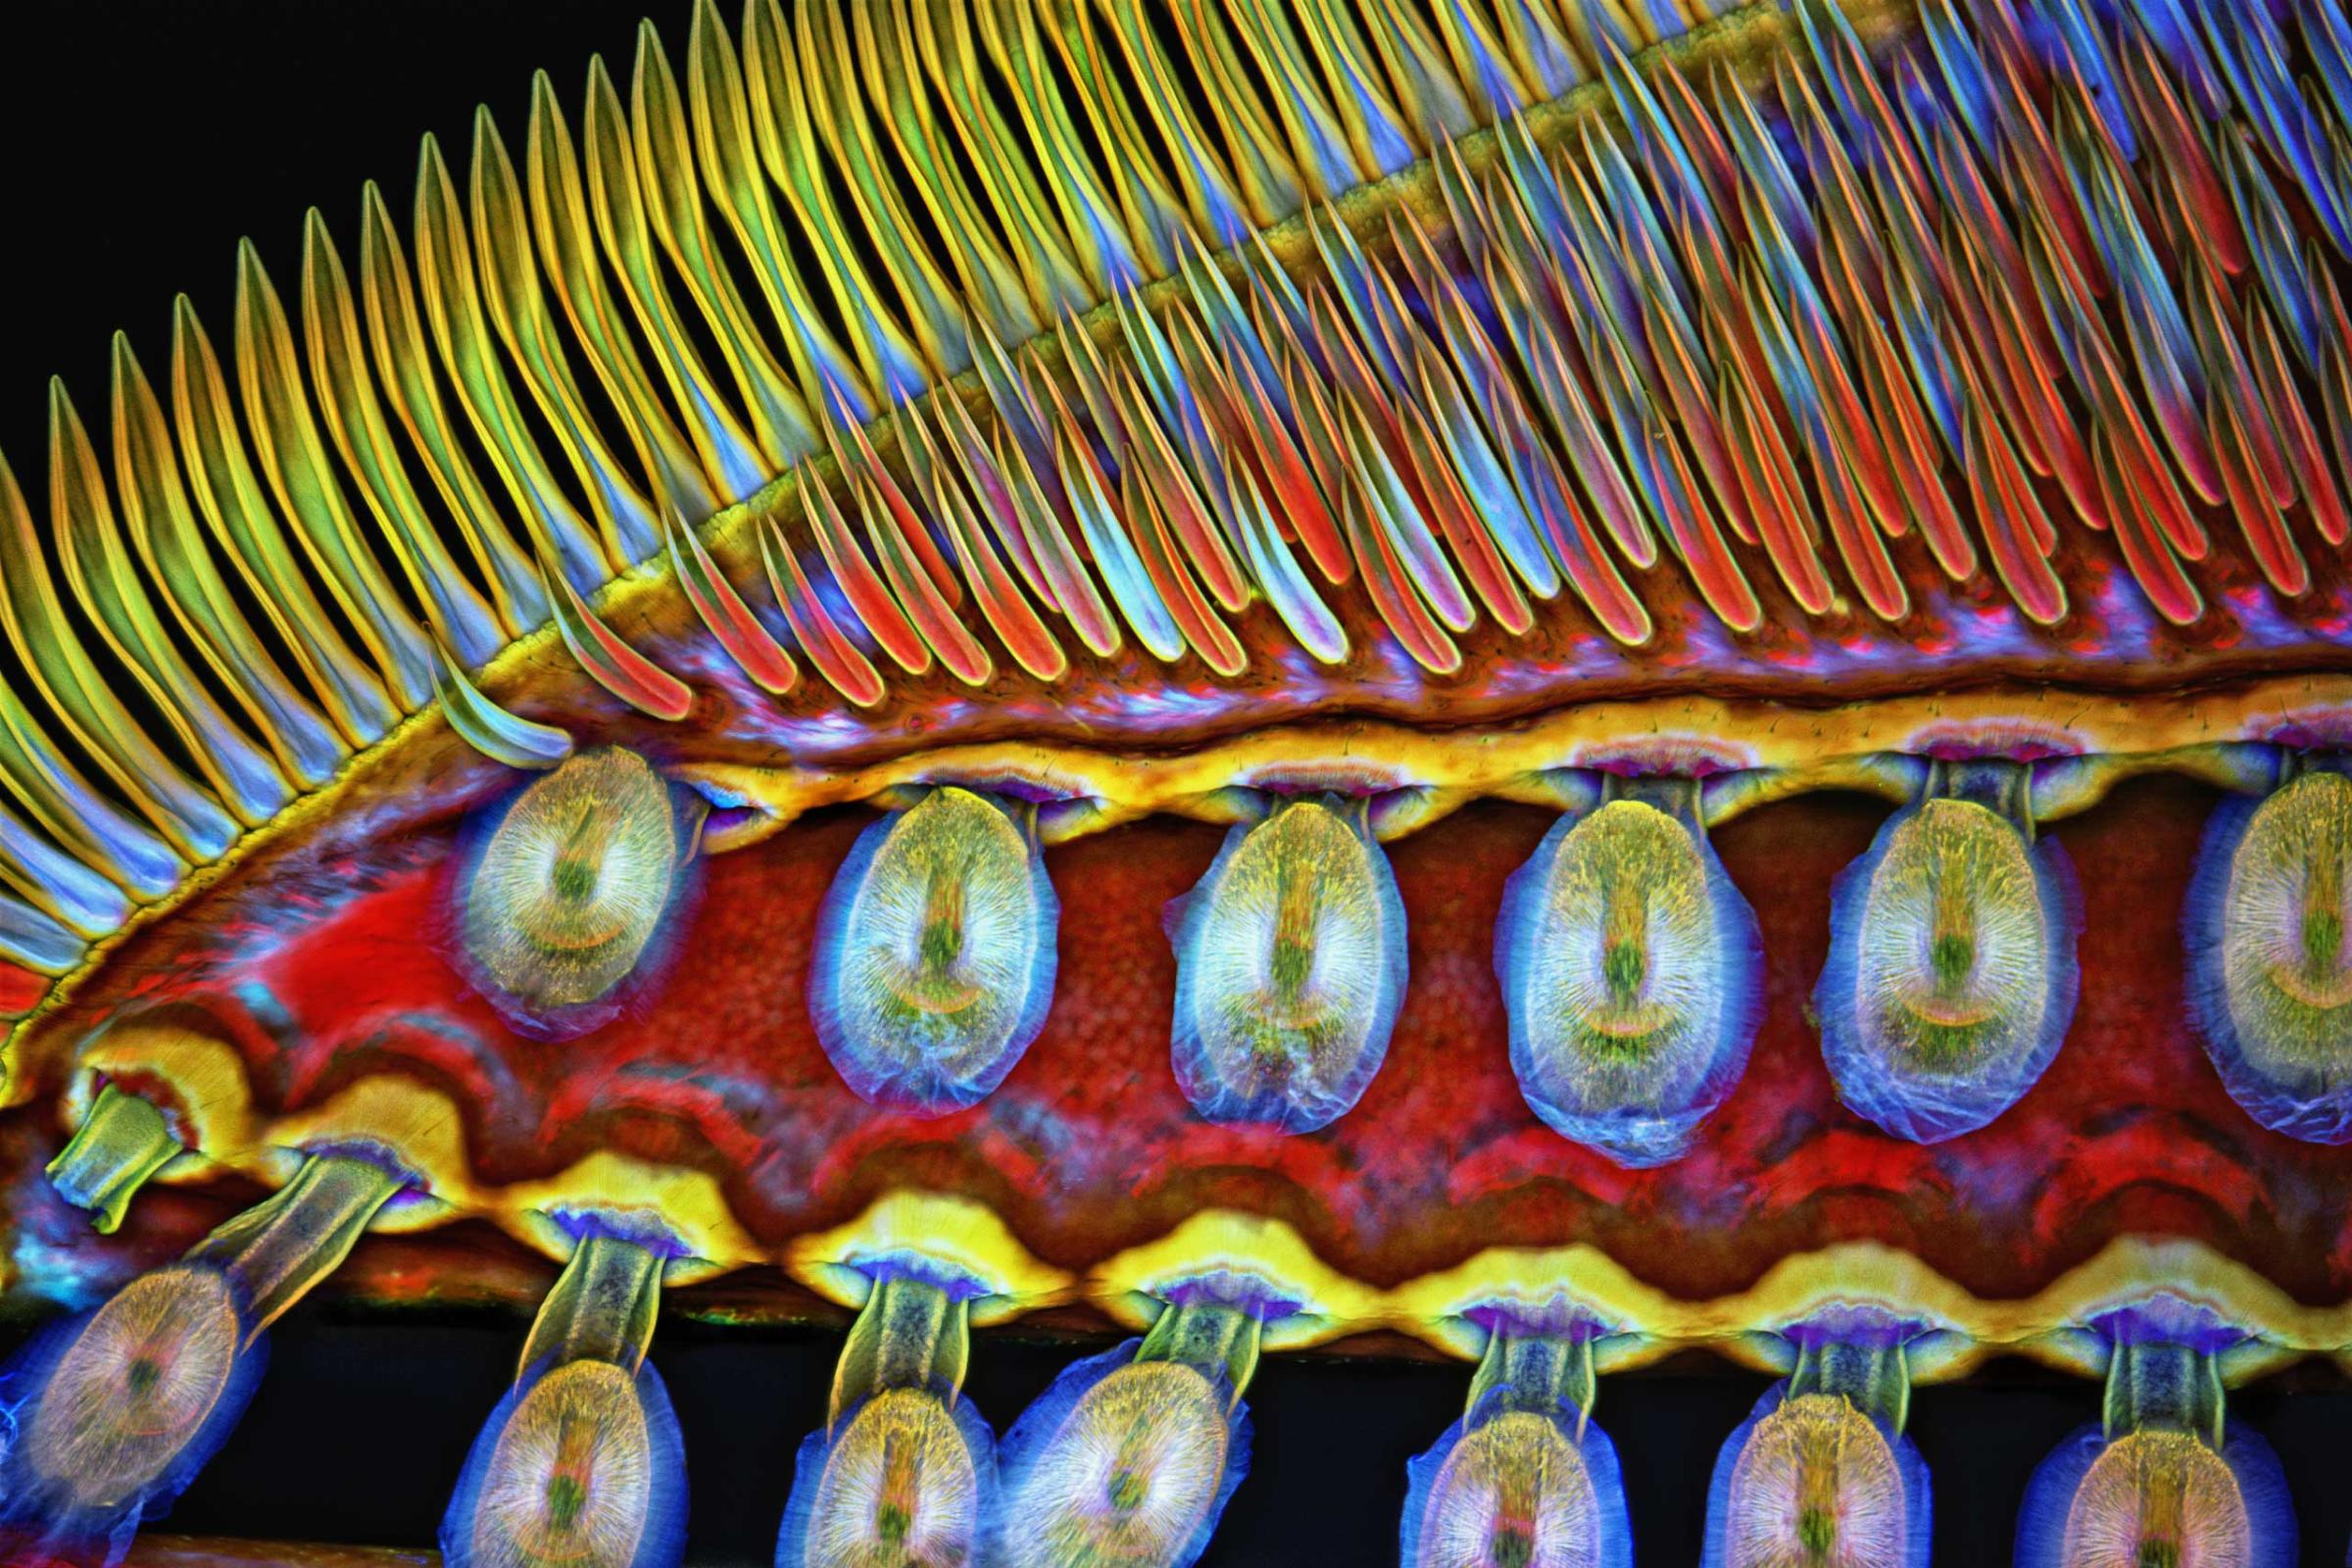 Part of the front foot of a giant diving beetle at 100x magnification.